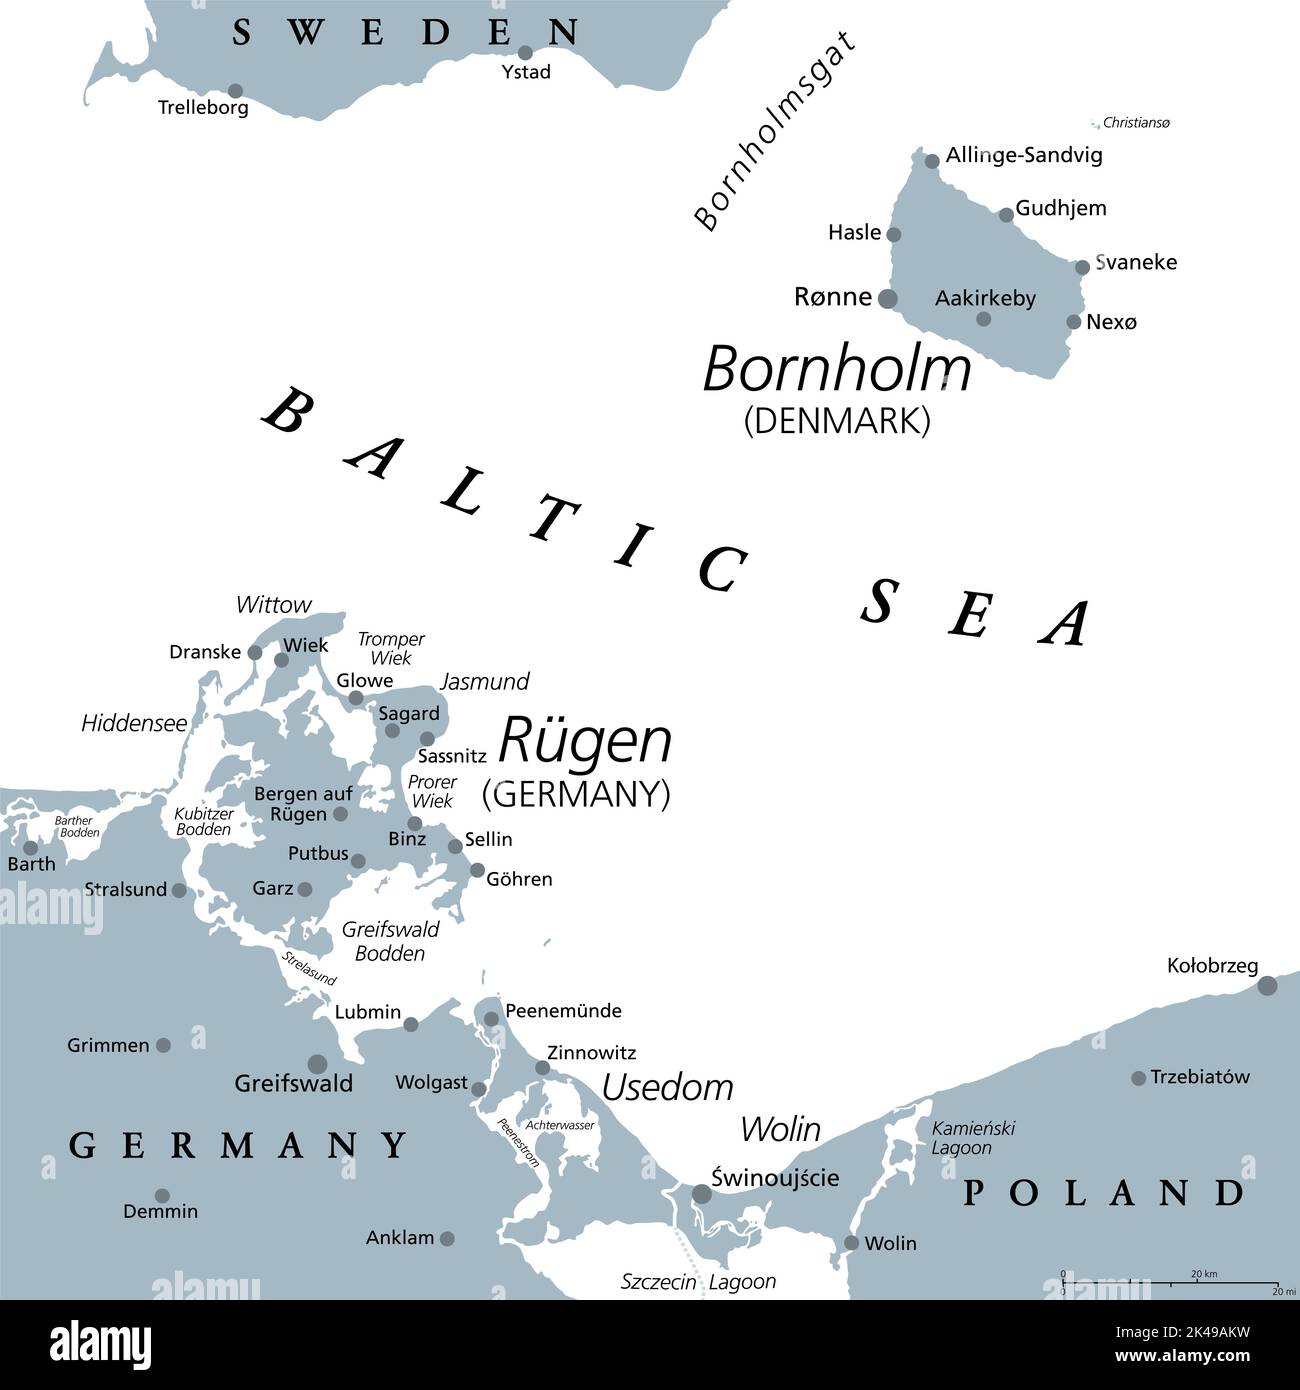 Danish island Bornholm and Germanys largest island Ruegen, gray political map. Both islands are located in southern Baltic Sea. Stock Photo